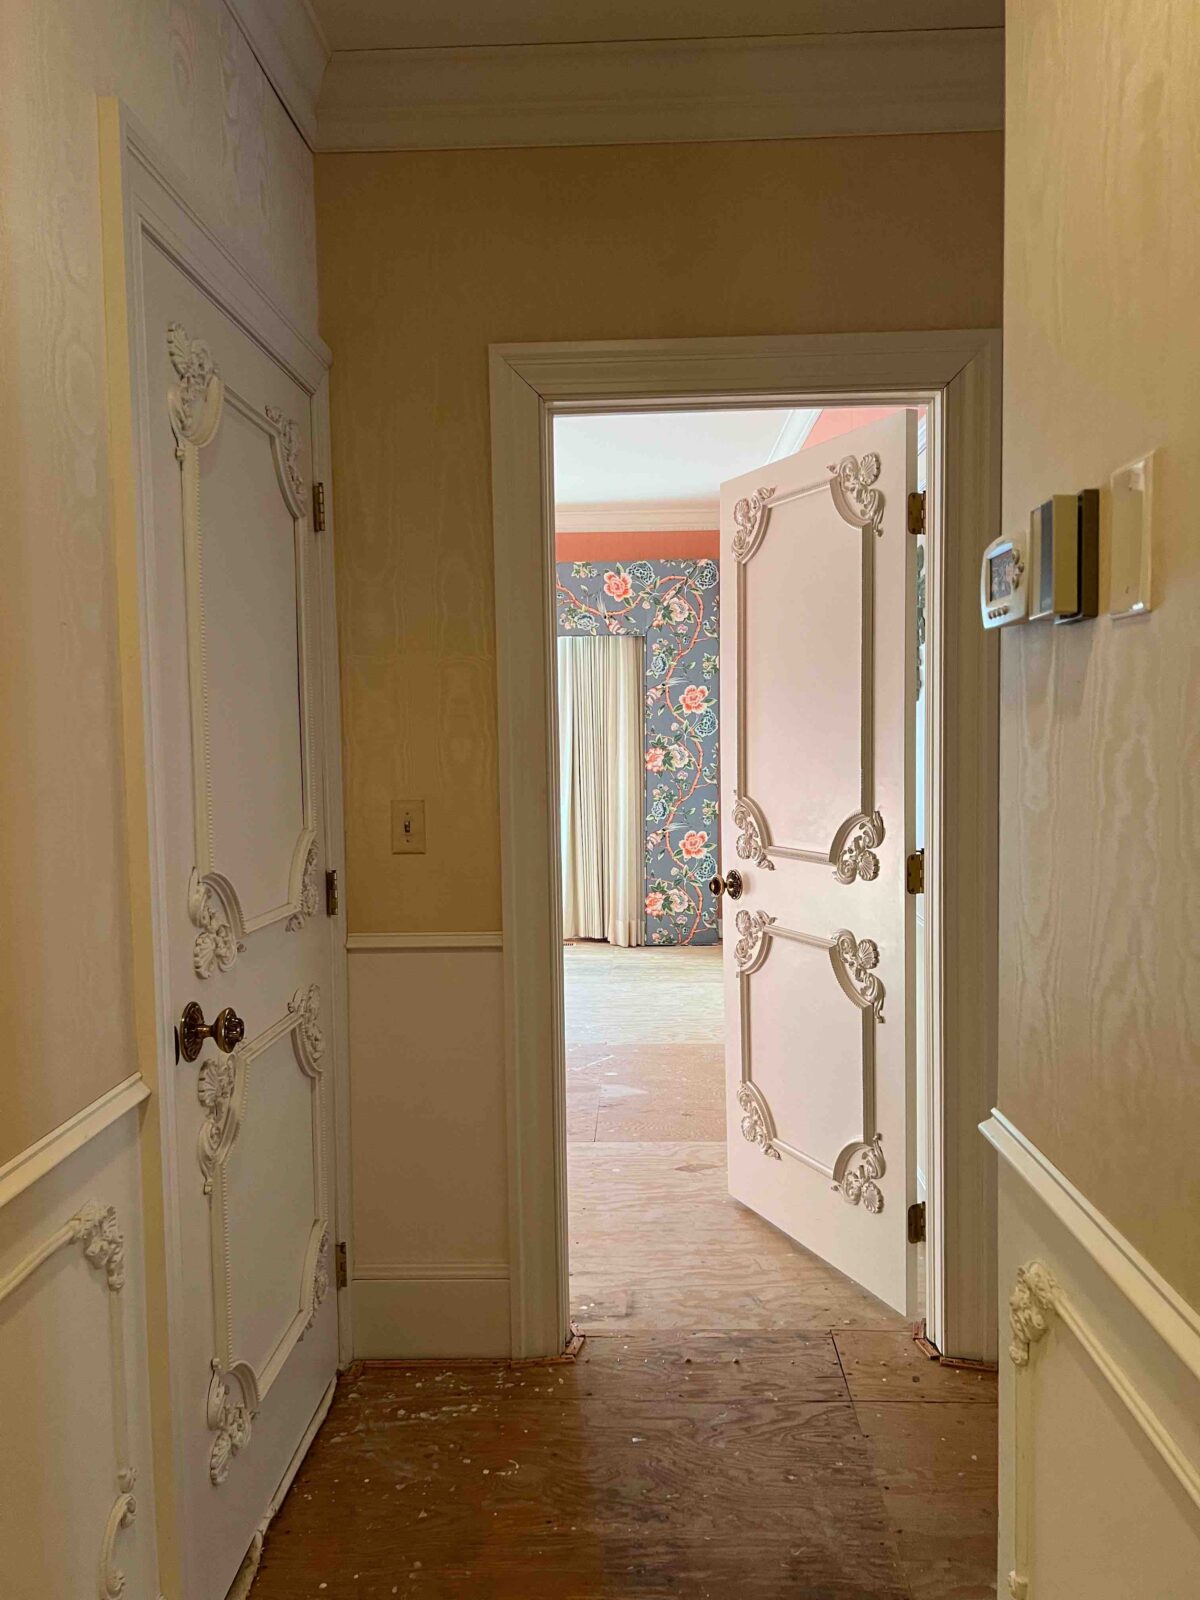 Hallway with wallpaper, wainscoting, and ornate details on the woodwork